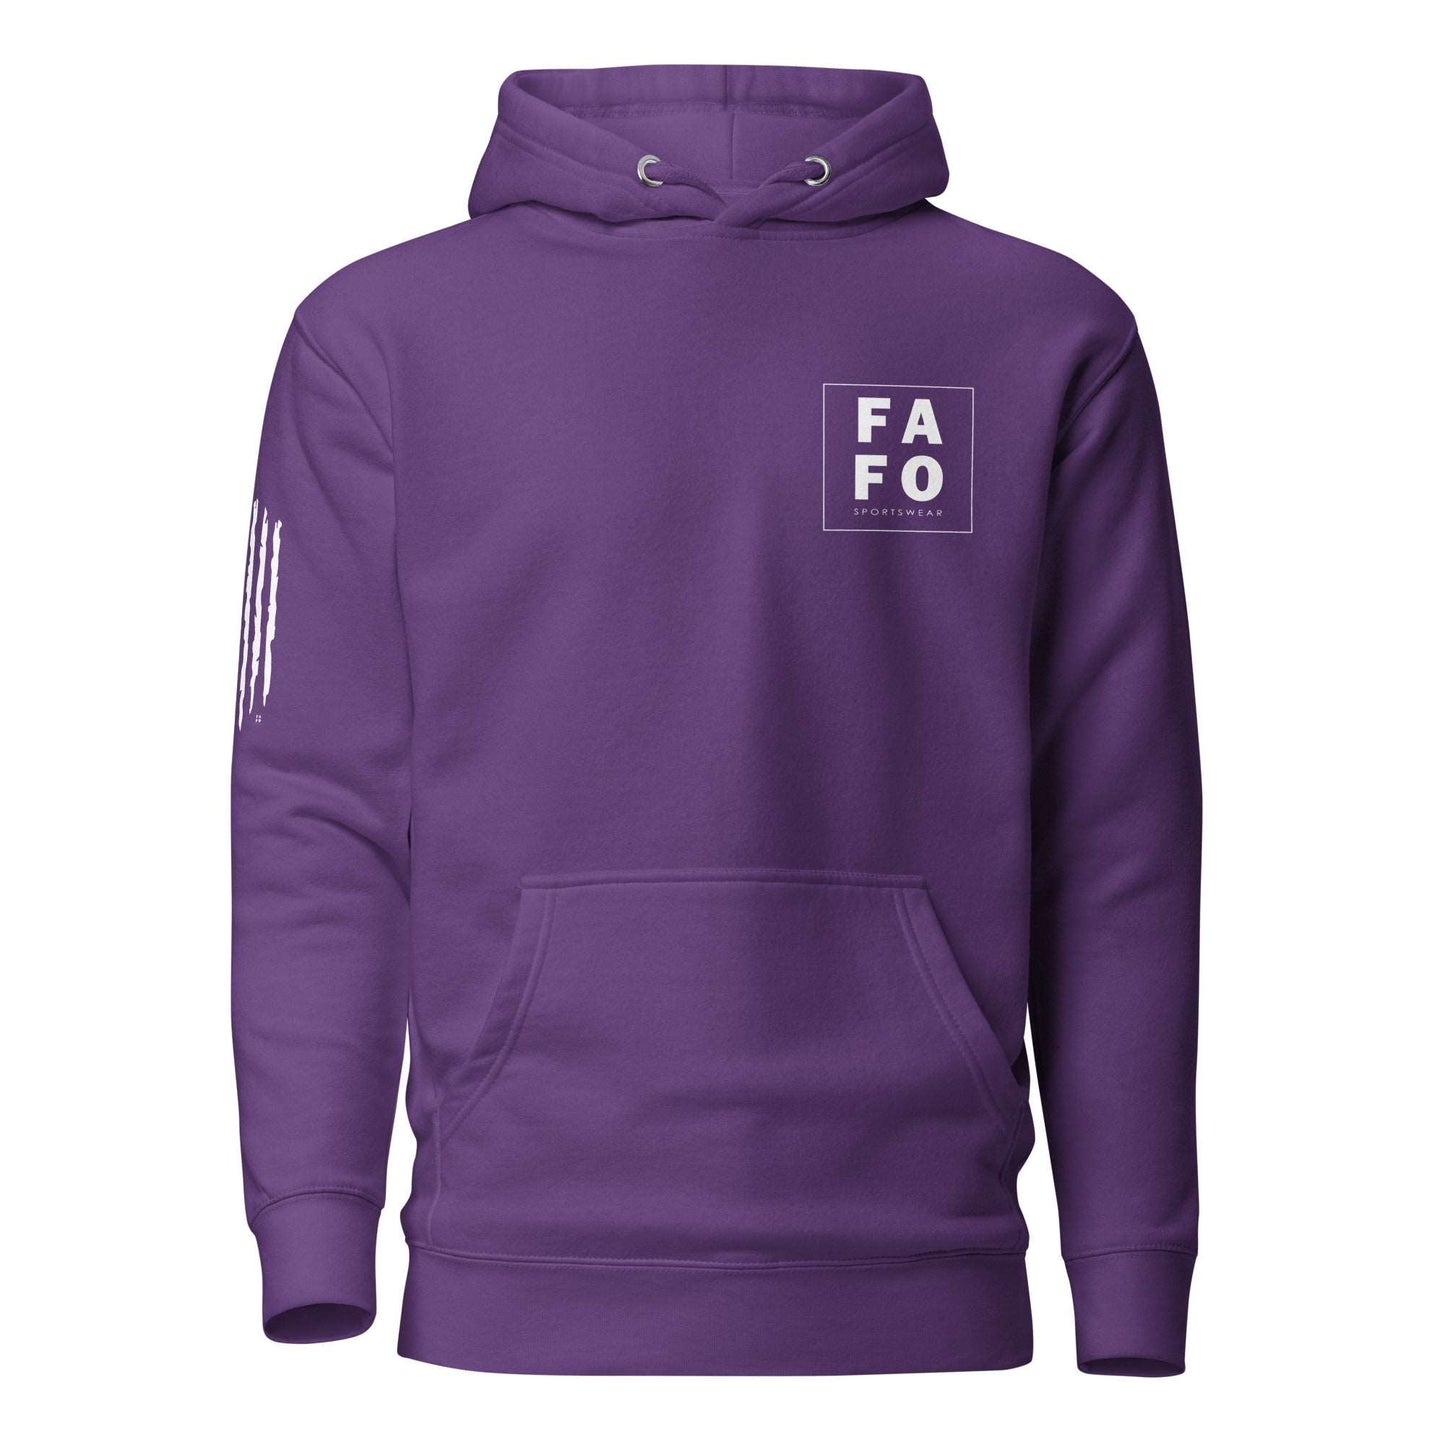 Men's Hoodie - F*k Around and Find Out